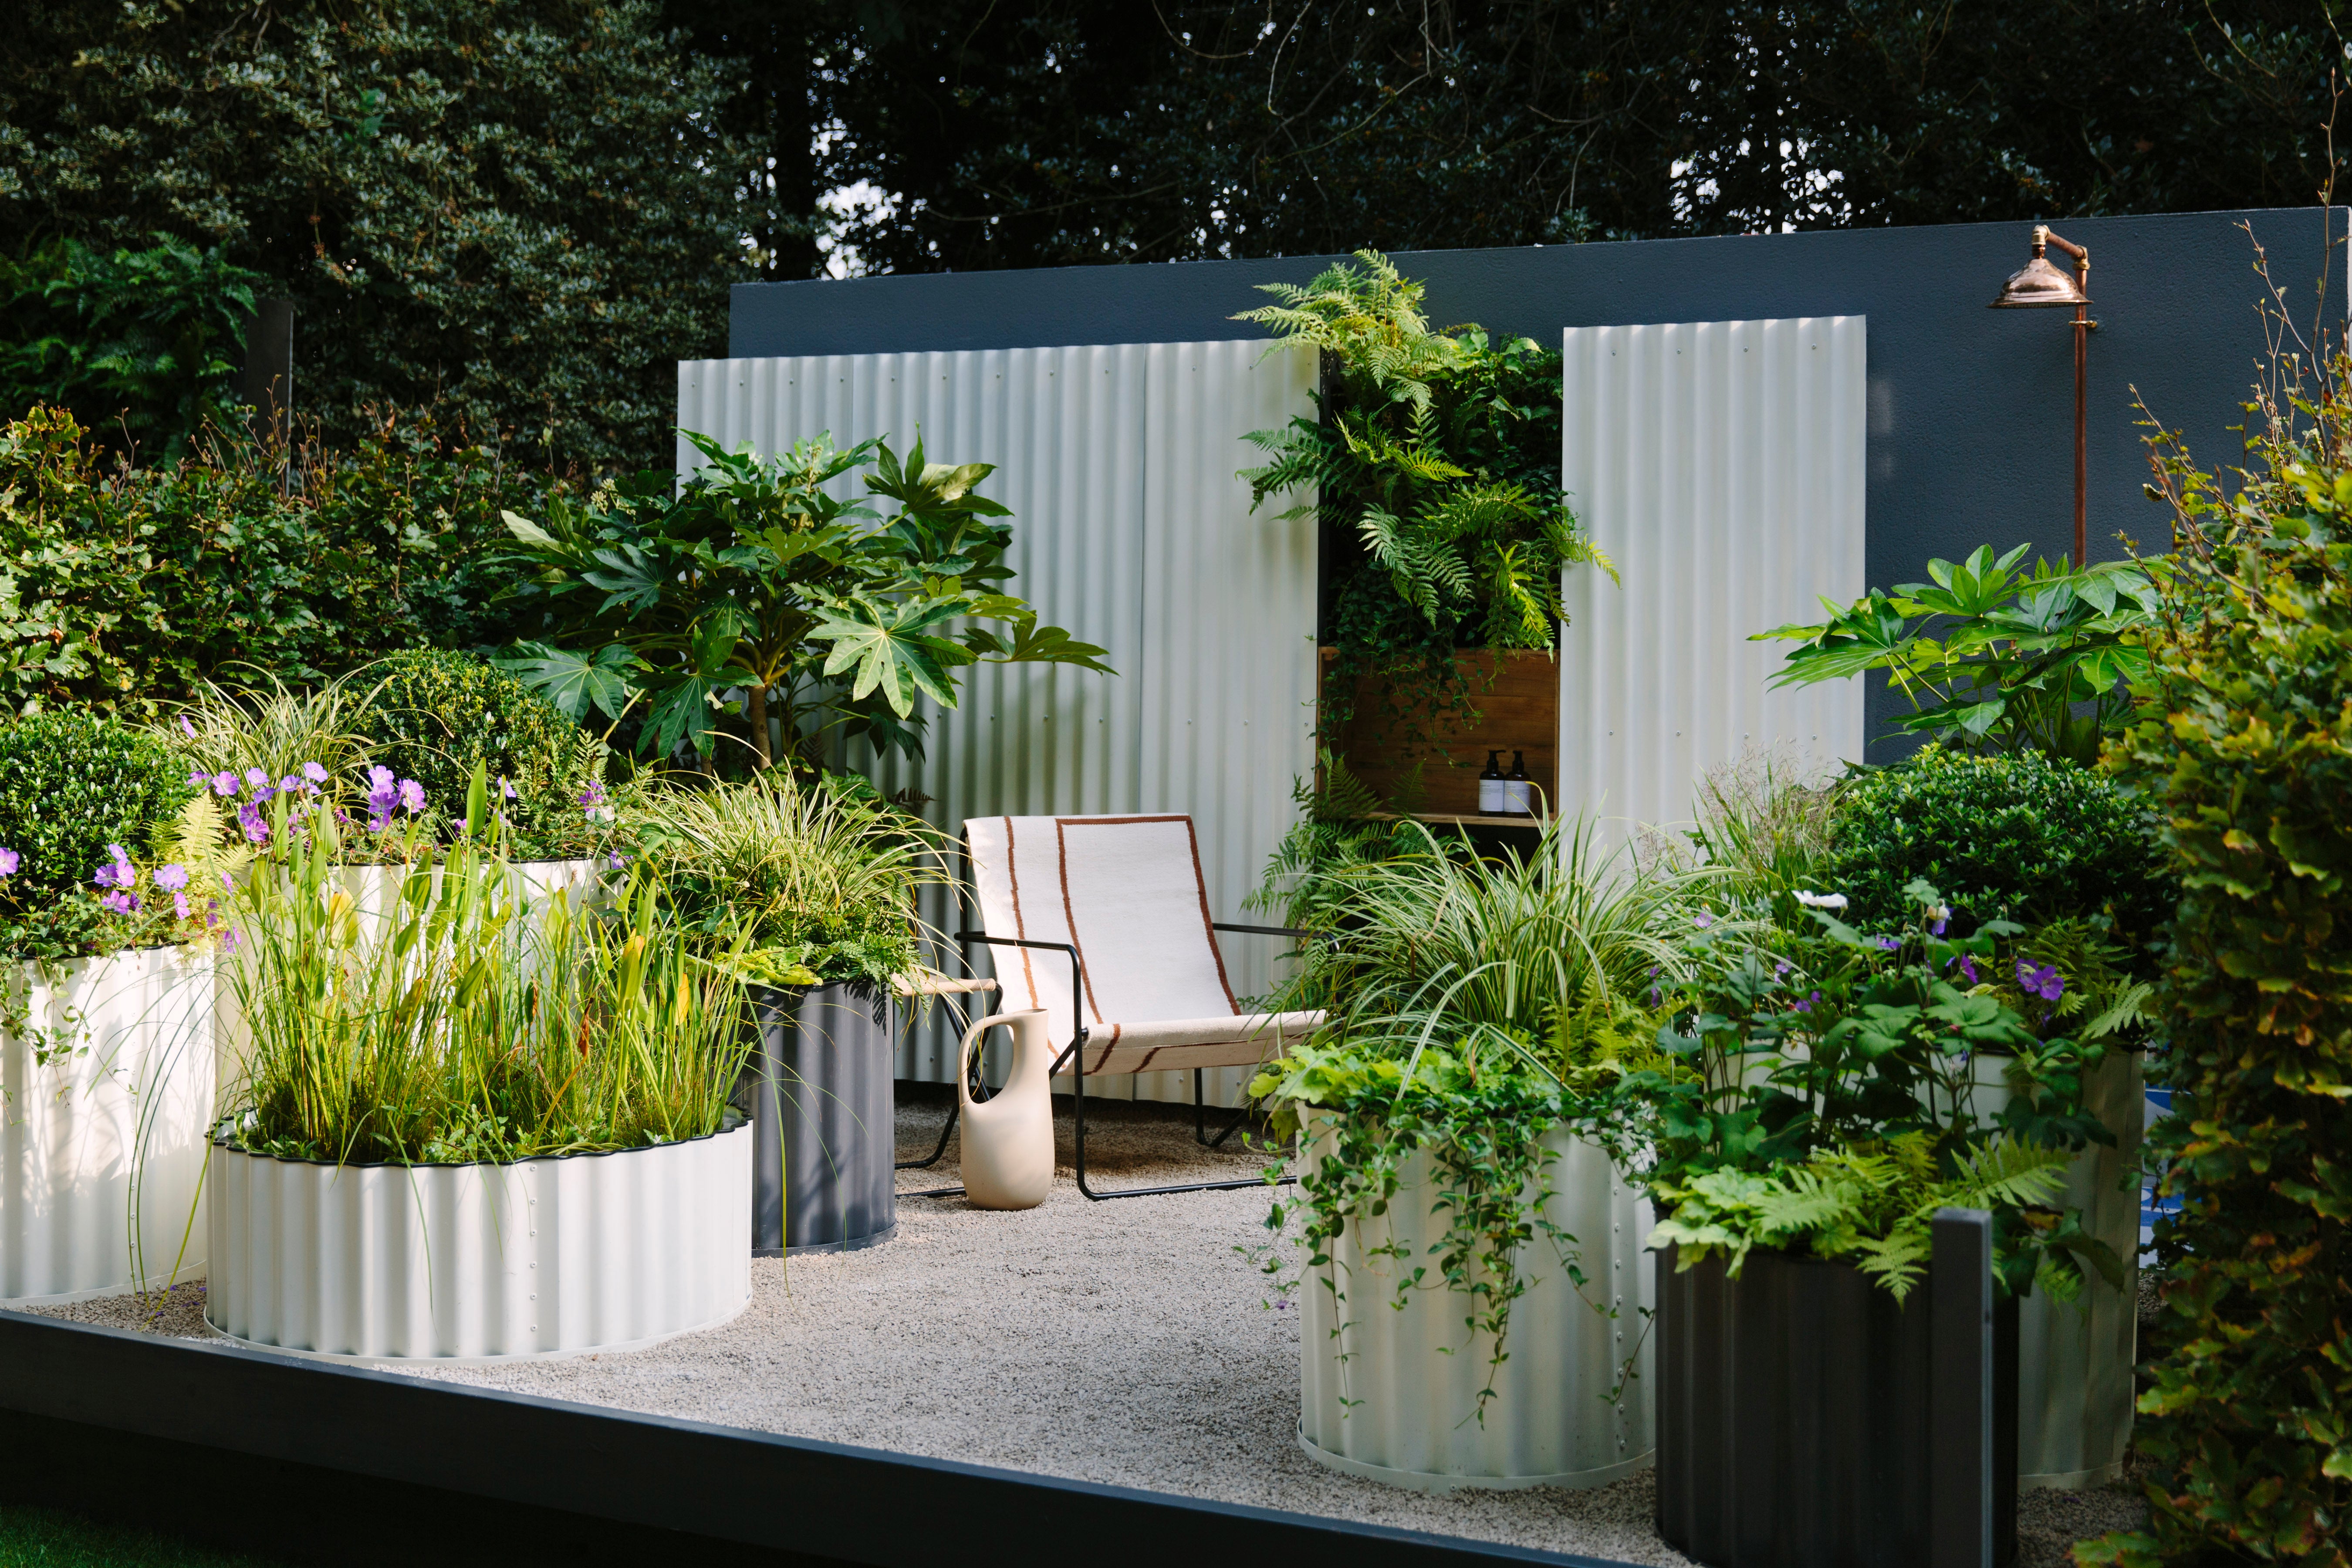 The Hot Tin Roof Garden at RHS Chelsea Flower Show